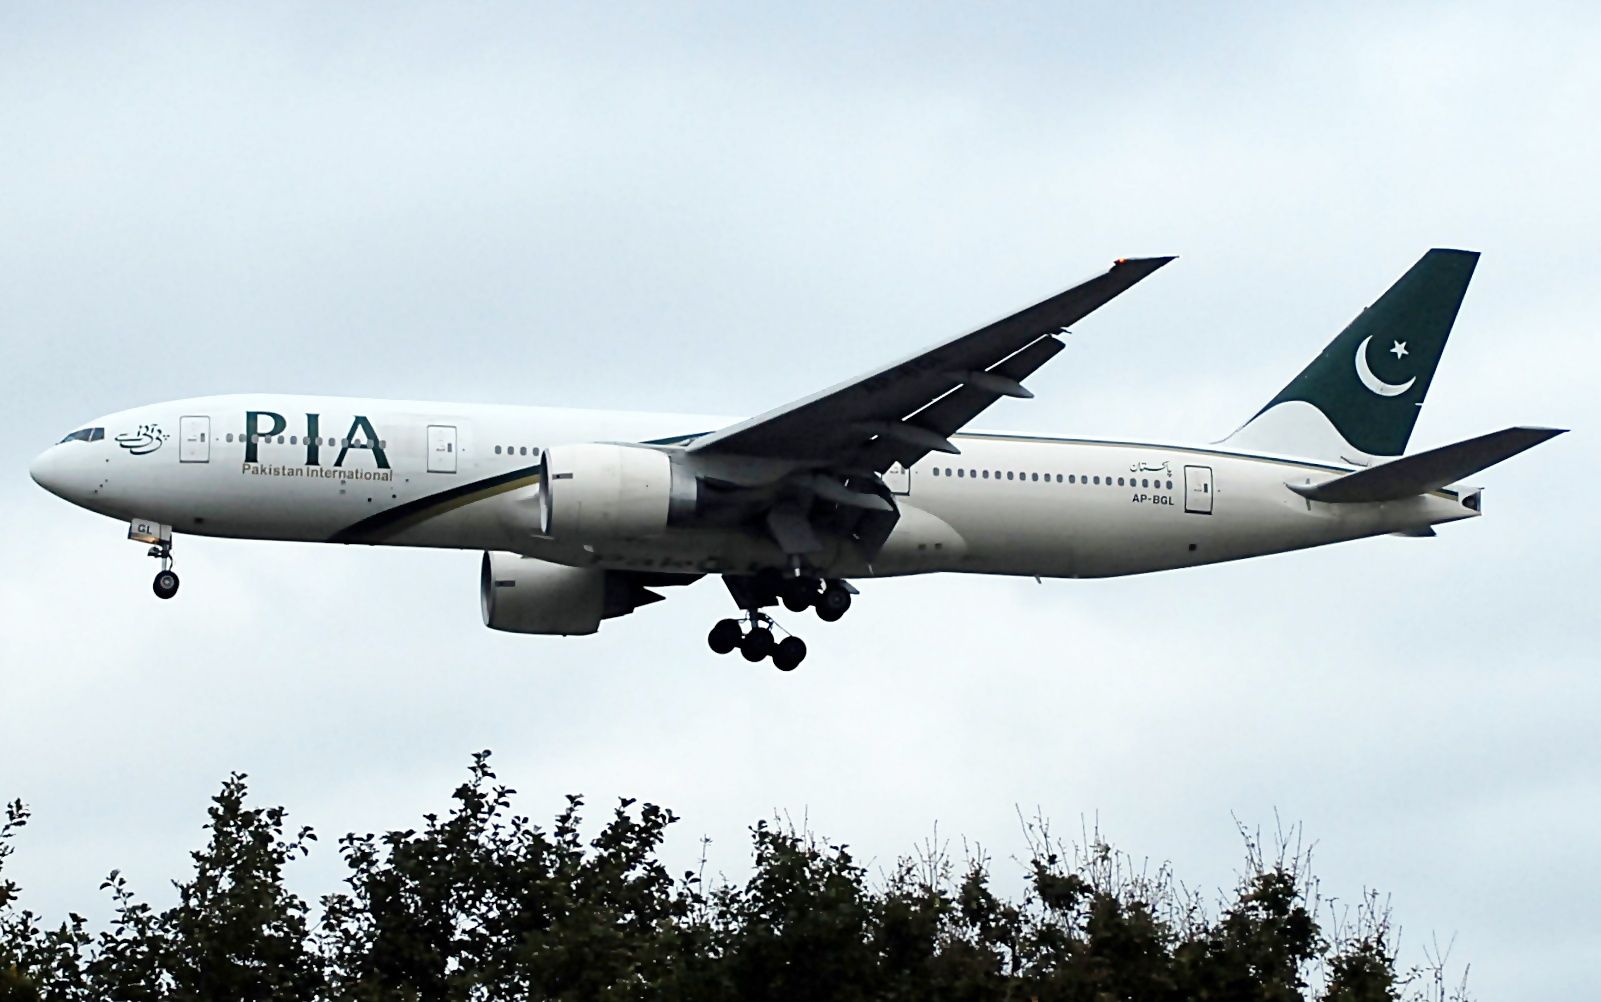 PIA on final